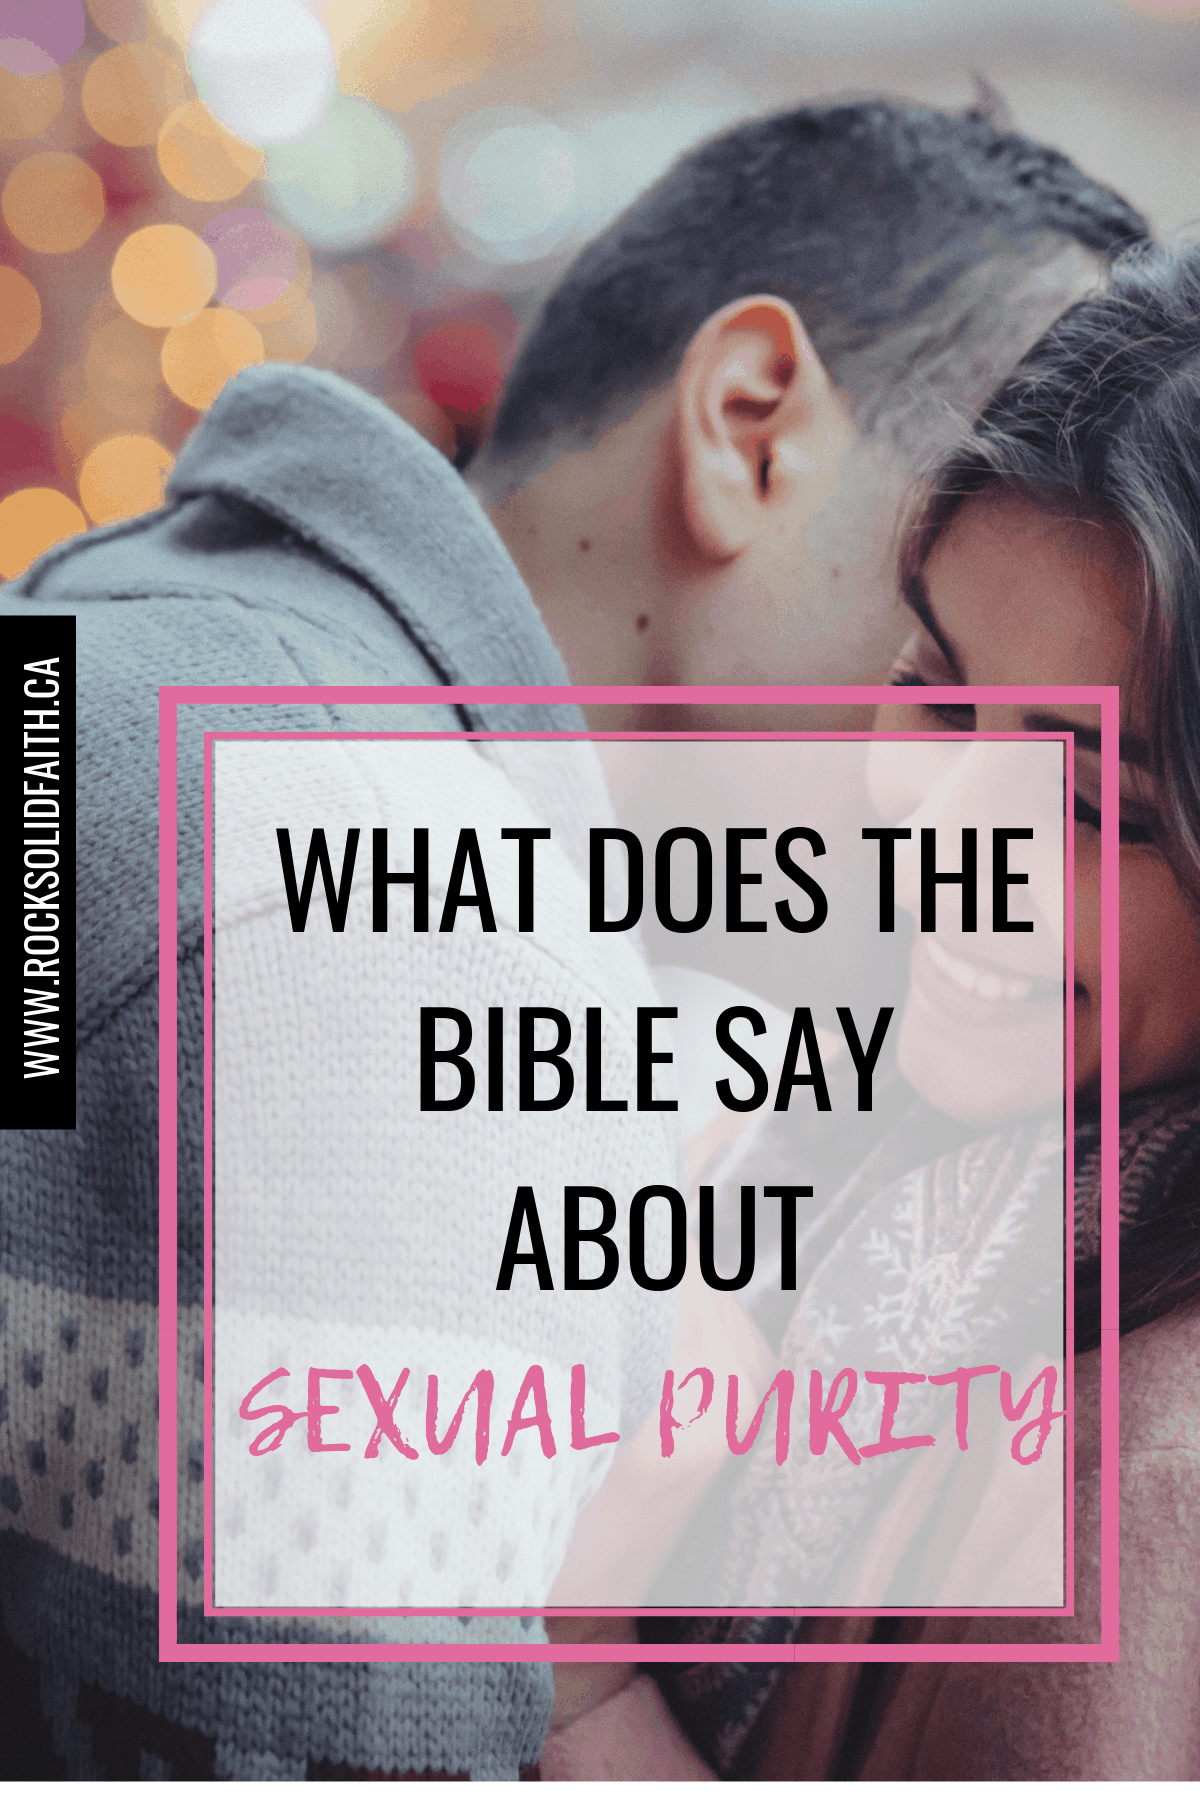 What Does The Bible Say About Sexual Purity?